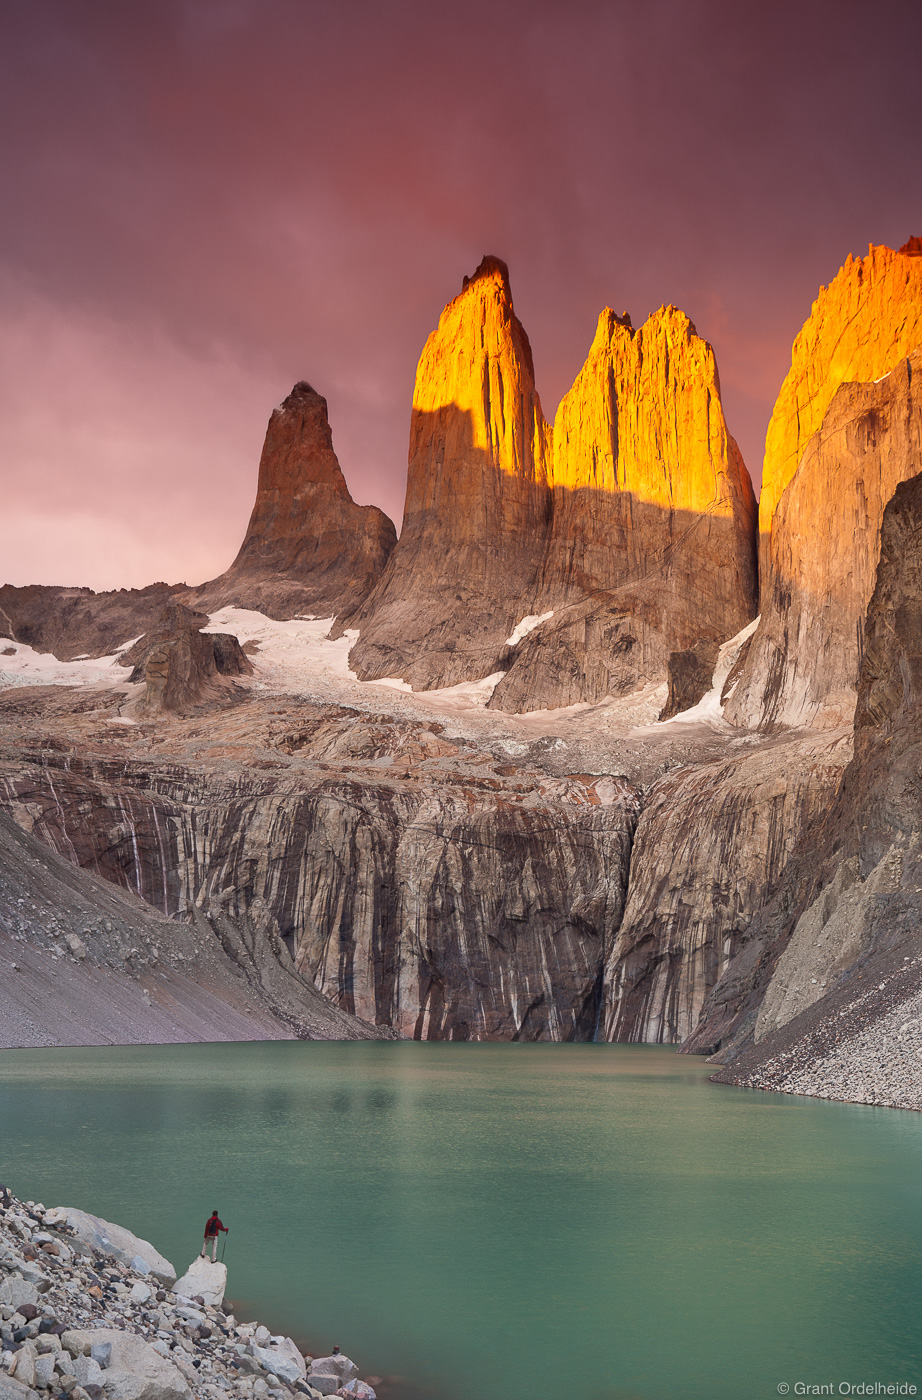 A person below the iconic Towers in Torres del Paine National Park.